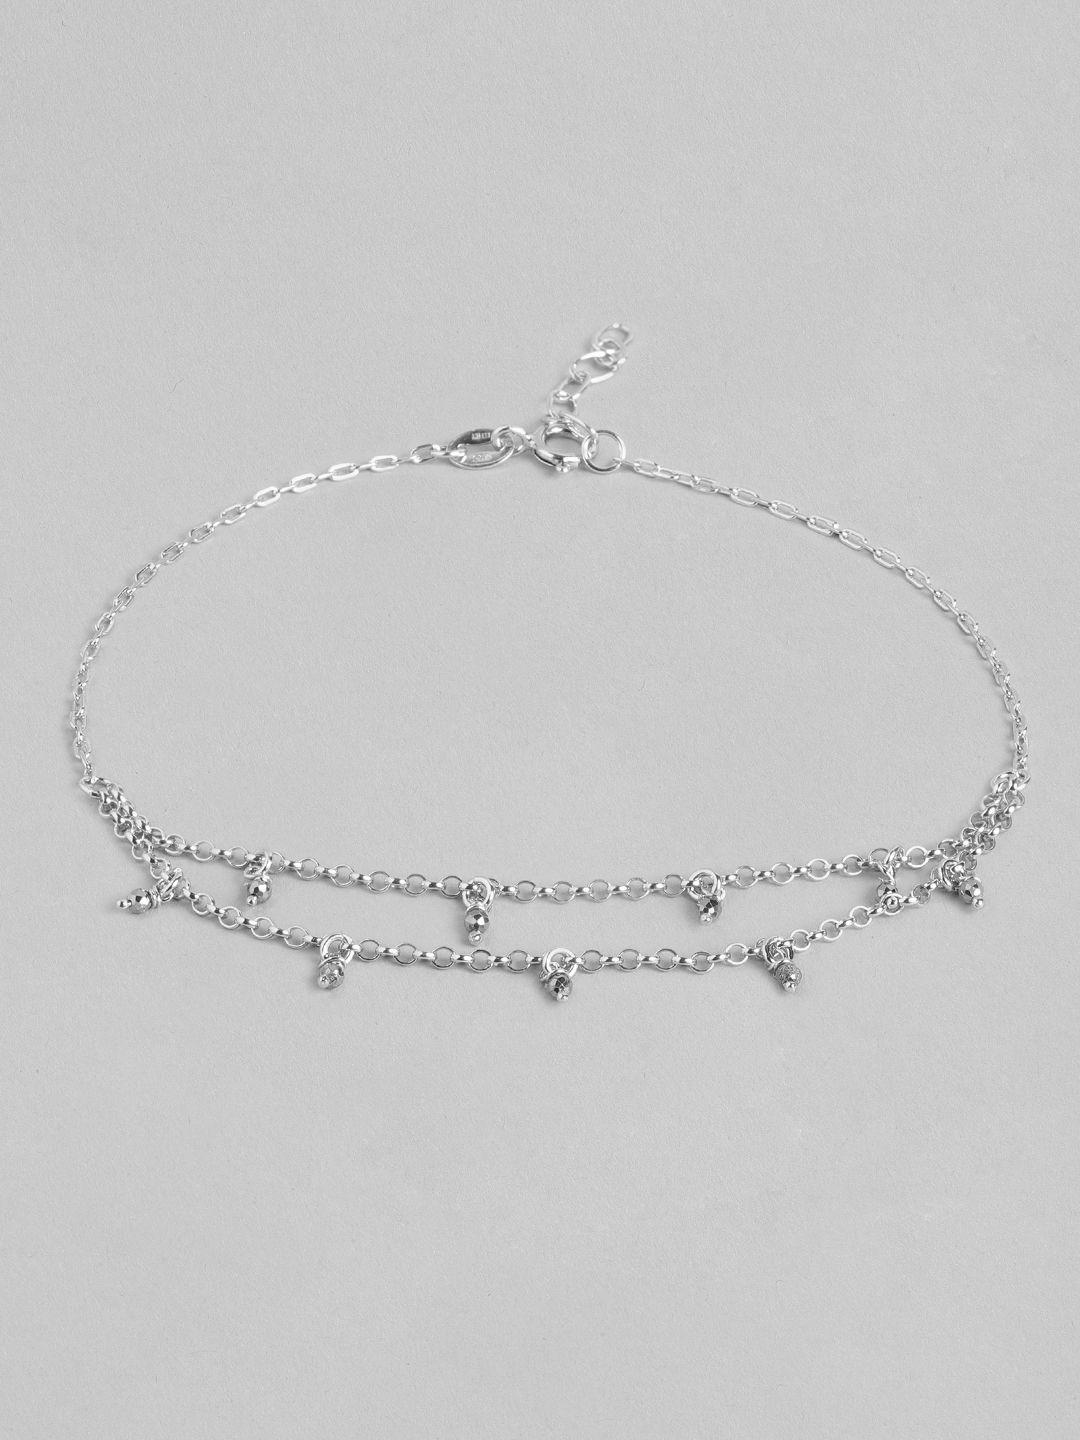 carlton-london-925-sterling-silver-rhodium-plated-cz-&-glass-bead-chain-adjustable-anklet